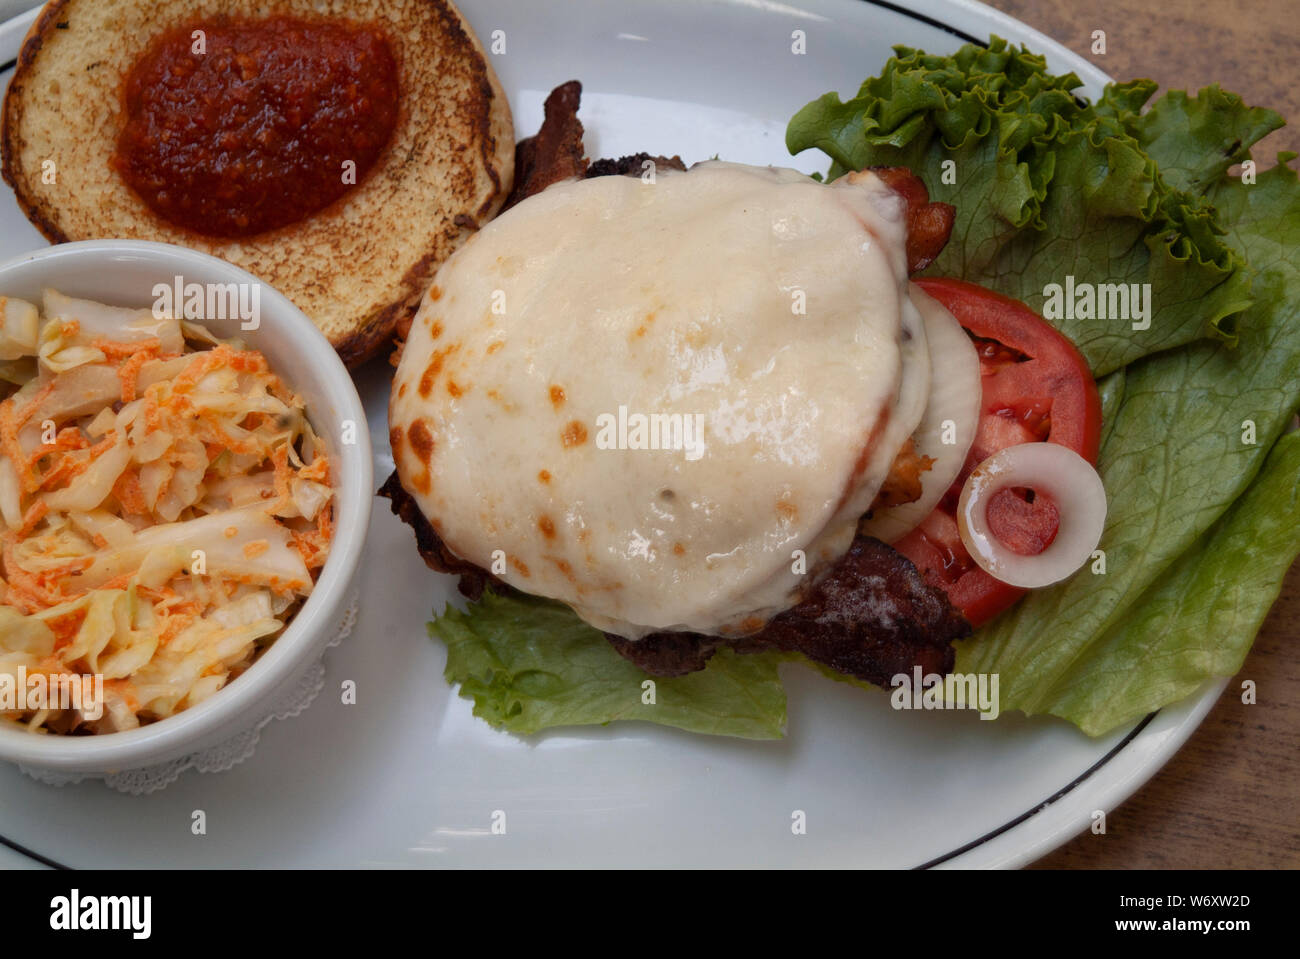 KING BEEF: A gourmet bacon cheeseburger with a rare horse radish spread is served up for a lunch meal at a restaurant in a Savannah, Georgia. Stock Photo